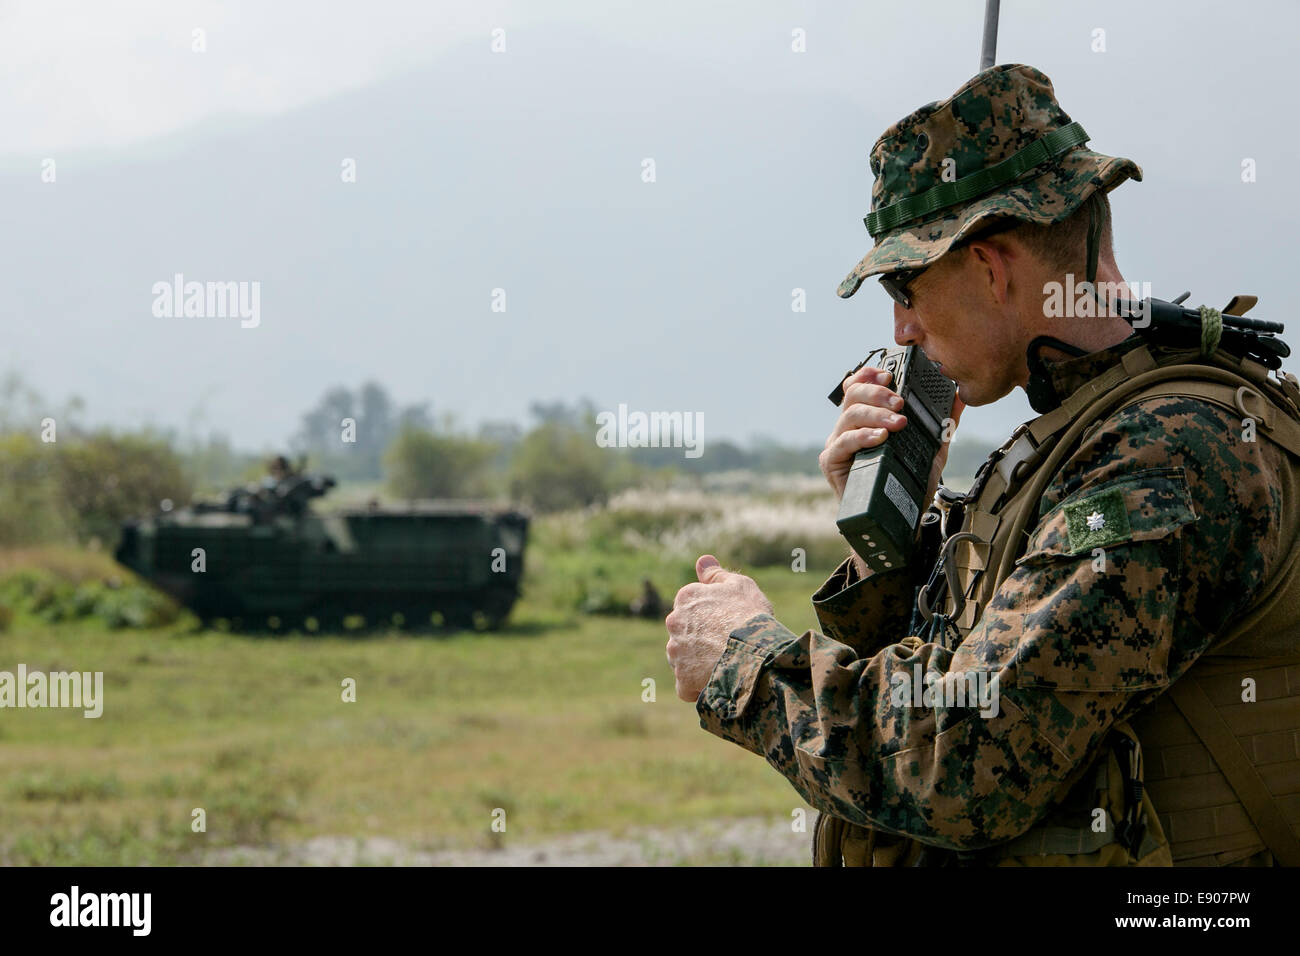 U.S. Marine Corps Lt. Col. Robert C. Rice, the commanding officer of Battalion Landing Team, 3rd Battalion, 5th Marine Regiment, 31st Marine Expeditionary Unit, communicates with his unit and Philippine marines during a mechanized assault as part of Amphi Stock Photo